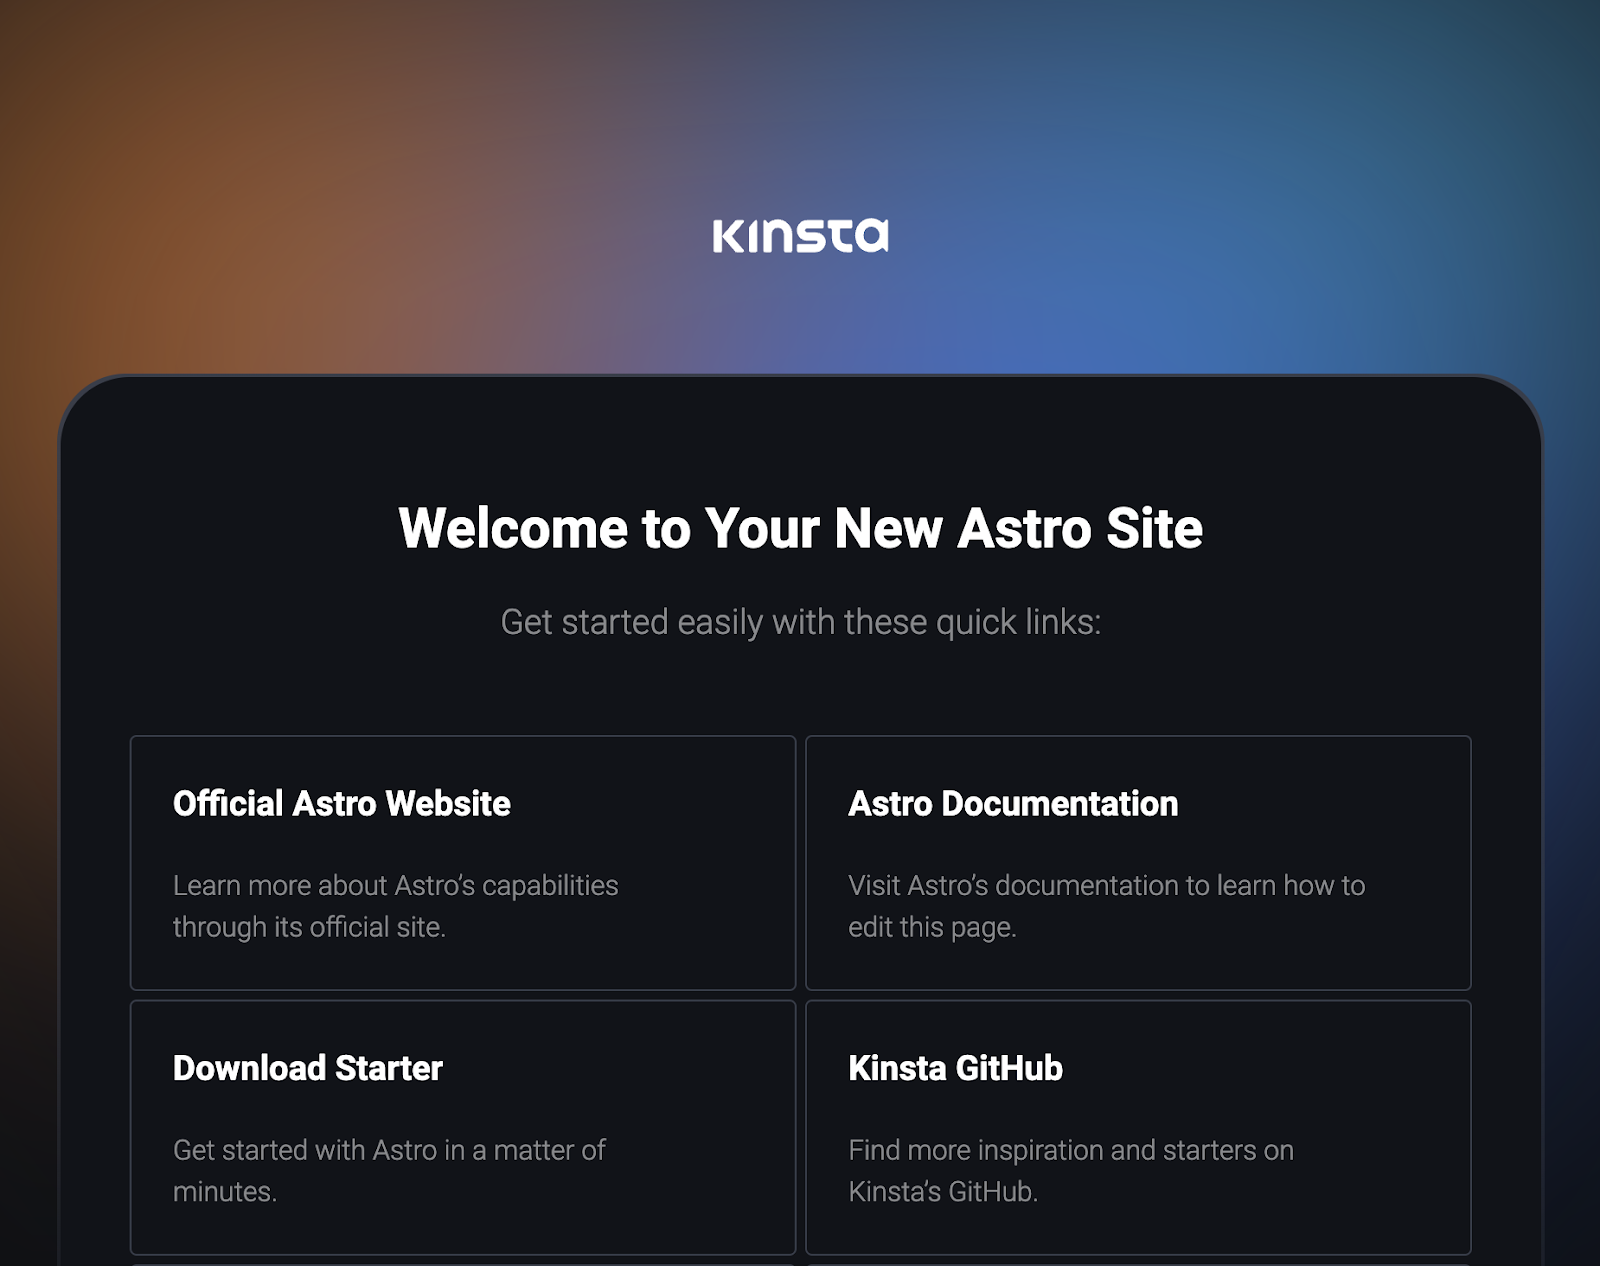 A dark page with the Kinsta logo in white in the center above the words "Welcome to Your New Astro Site", followed by two rows of cards with labels "Official Astro Website", "Astro Documentation", "Download Starter", and "Kinsta GitHub".